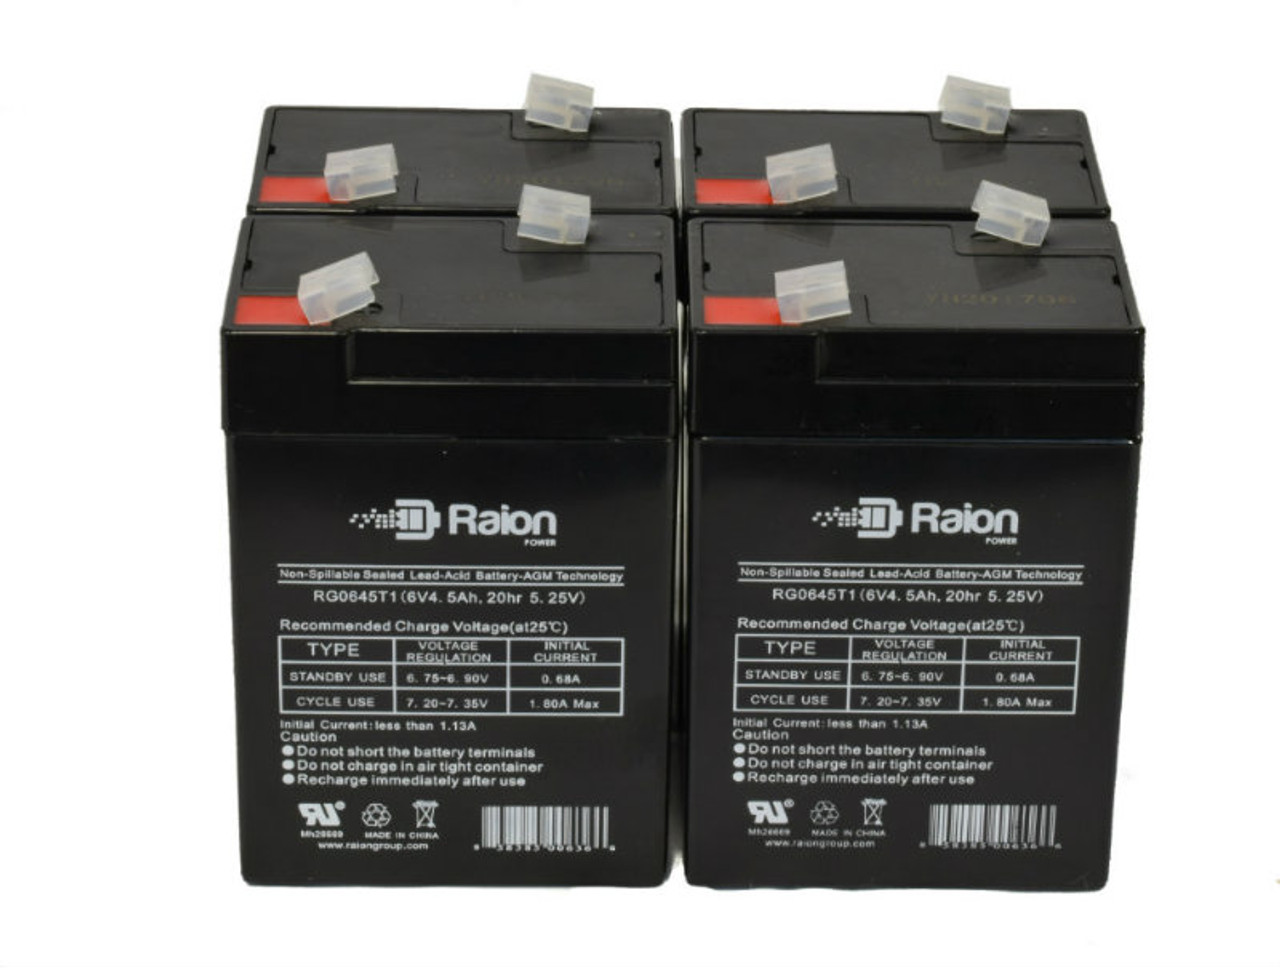 Raion Power 6 Volt 4.5Ah RG0645T1 Replacement Battery for Gaston GT6-4.5 - 4 Pack